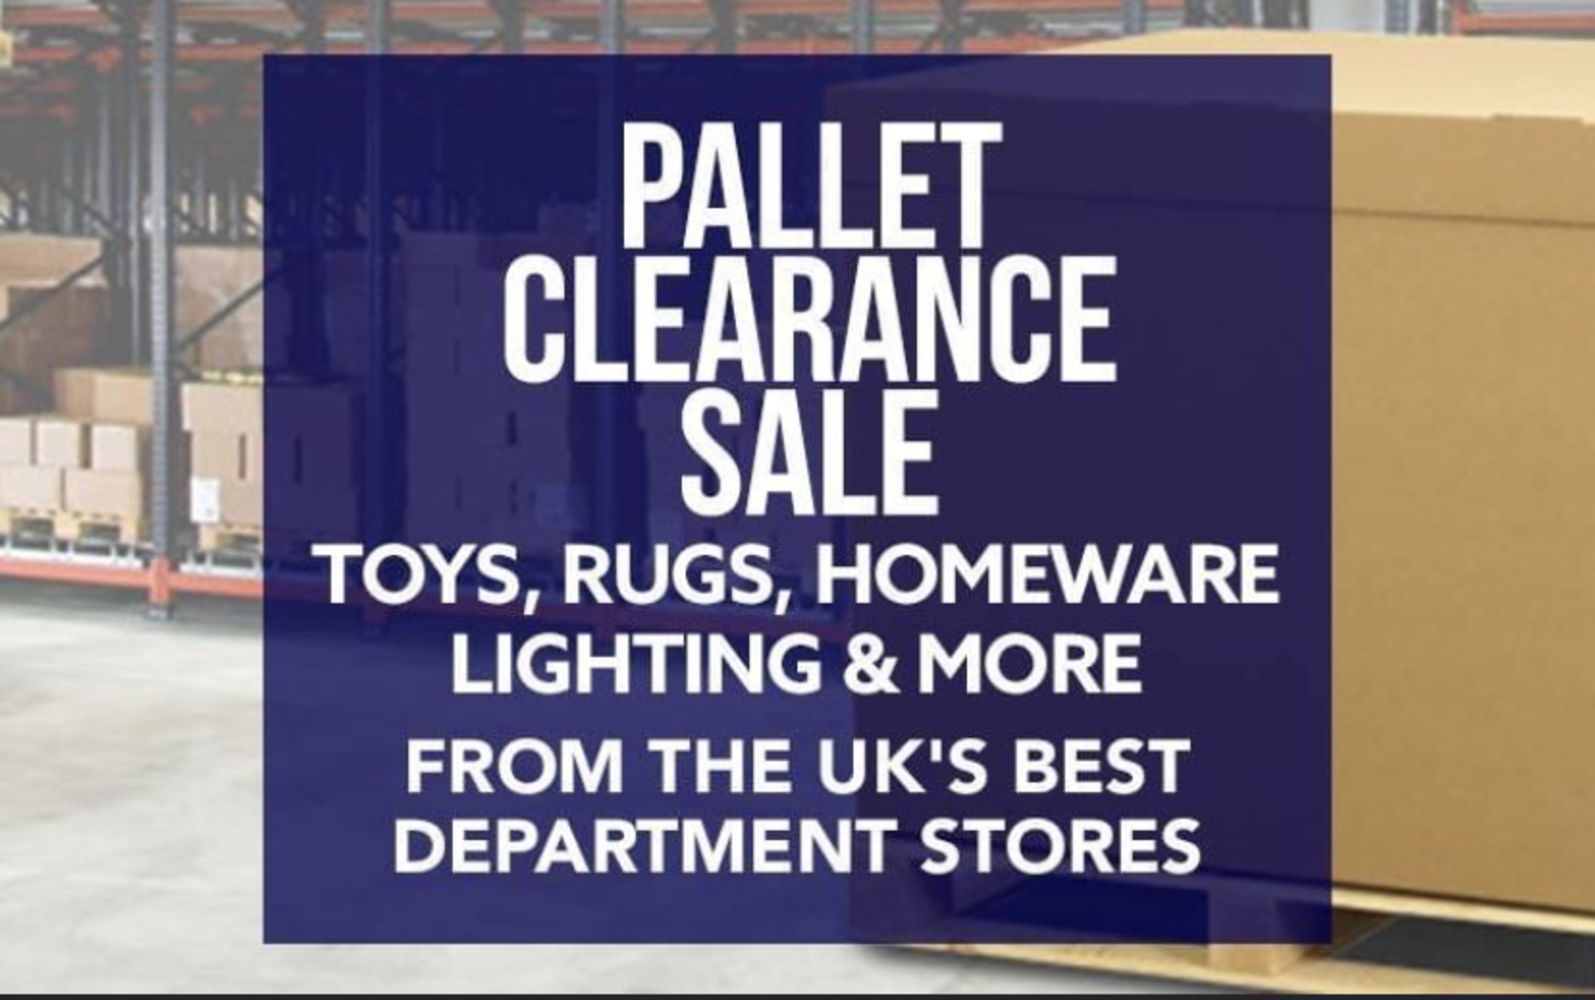 No Reserve - Pallet Clearance Sale! 15th February 2021